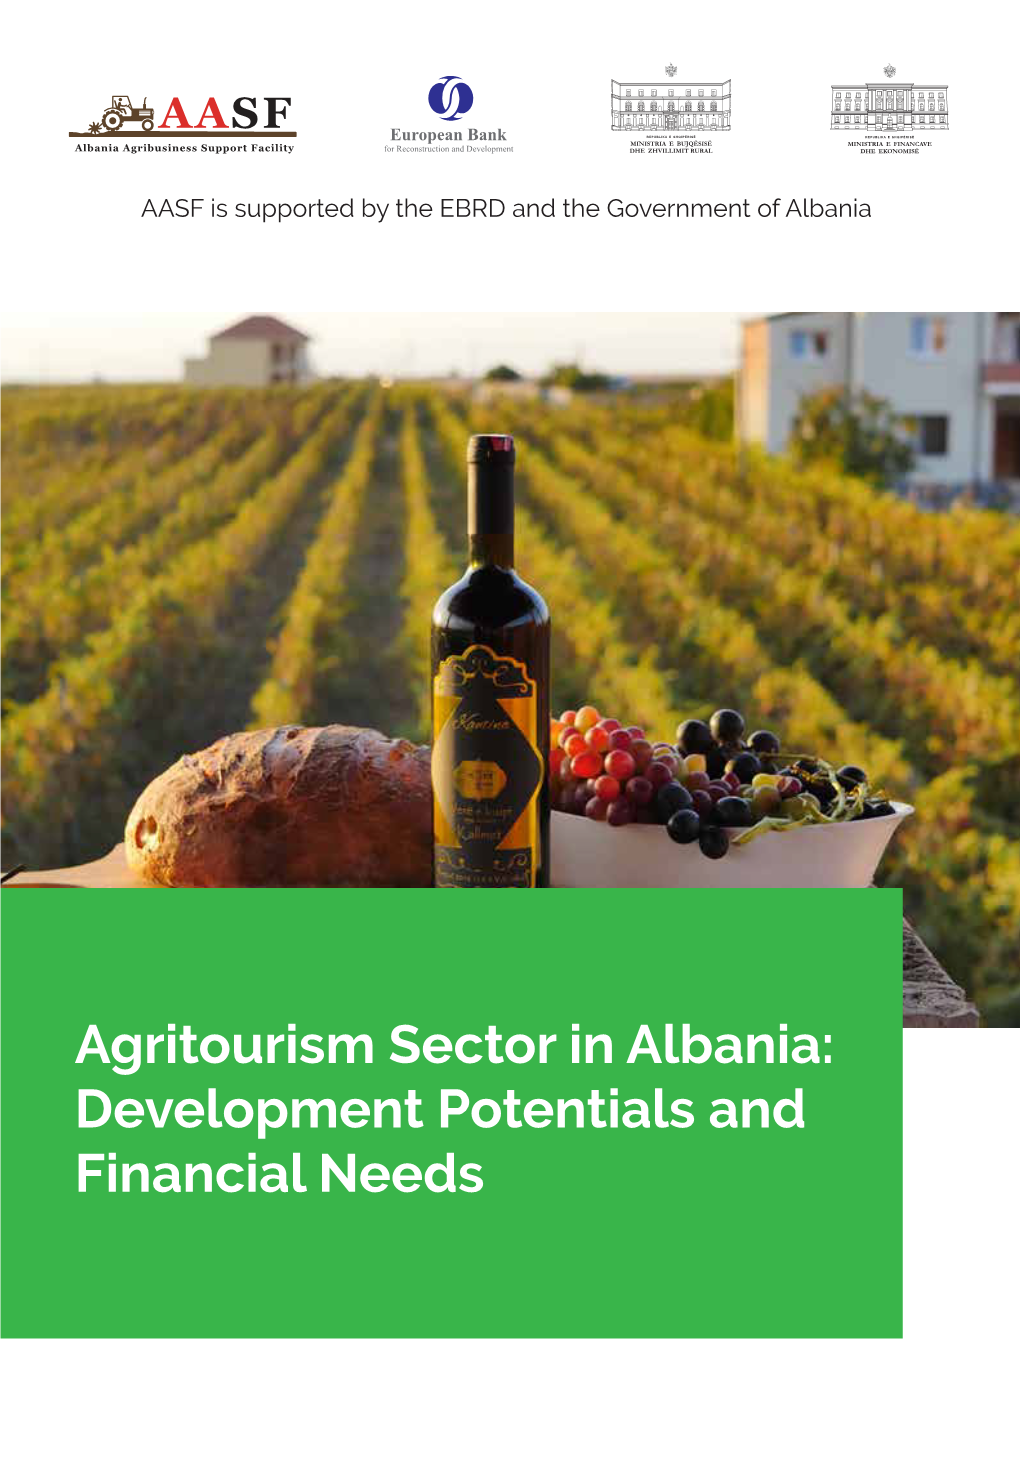 Agritourism Sector in Albania: Development Potentials and Financial Needs